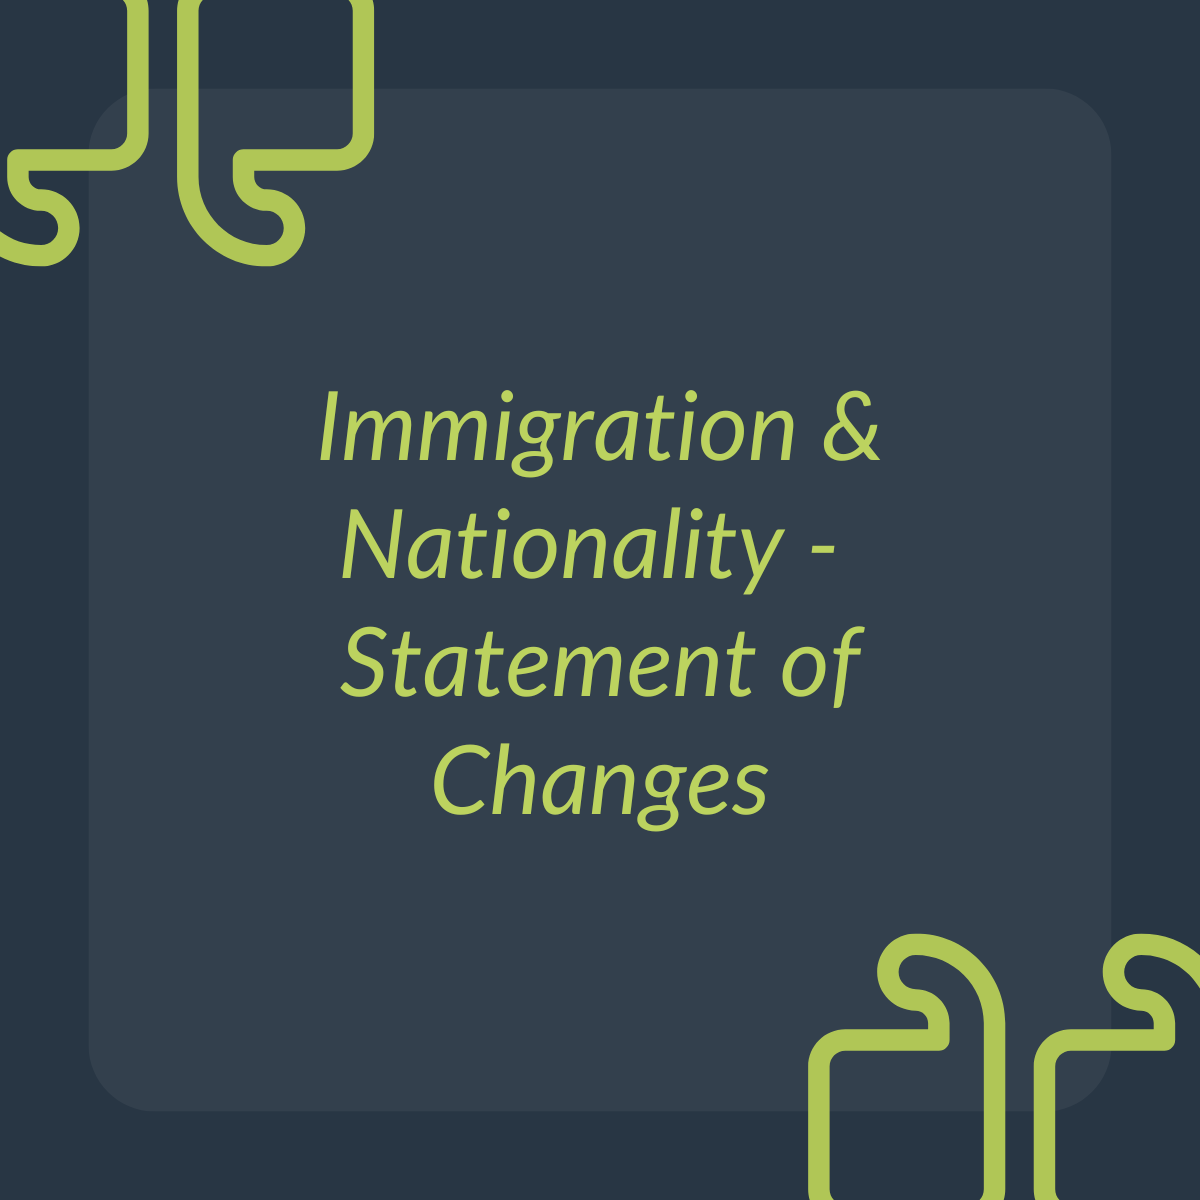 Immigration & Nationality Changes